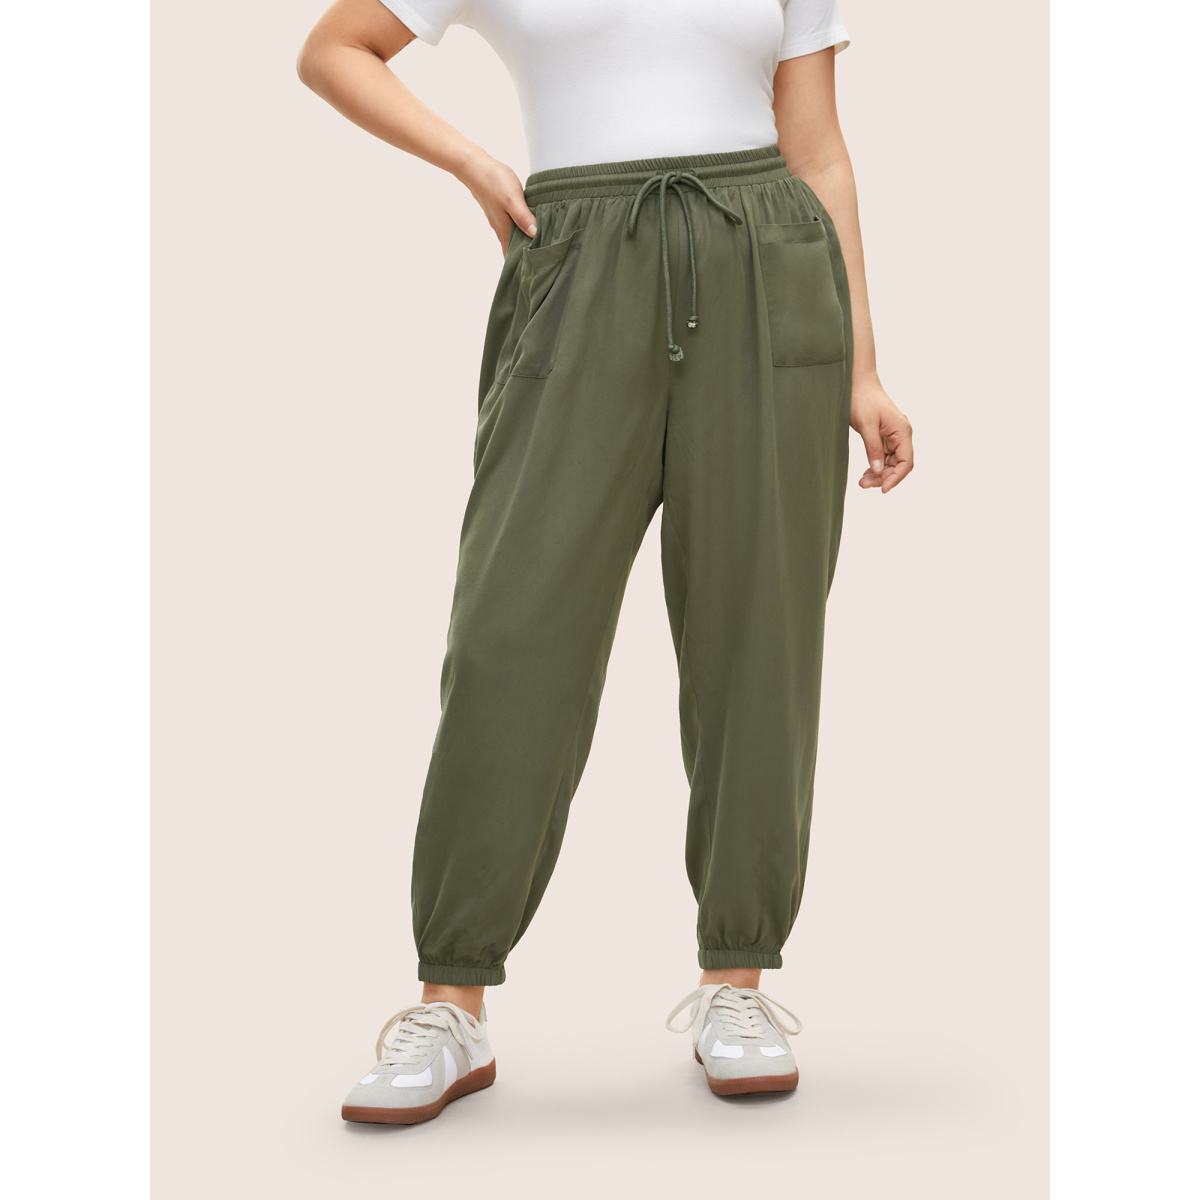 

Plus Size Solid Patched Pocket Elastic Waist Drawstring Pants Women ArmyGreen Casual Loose High Rise Everyday Pants BloomChic